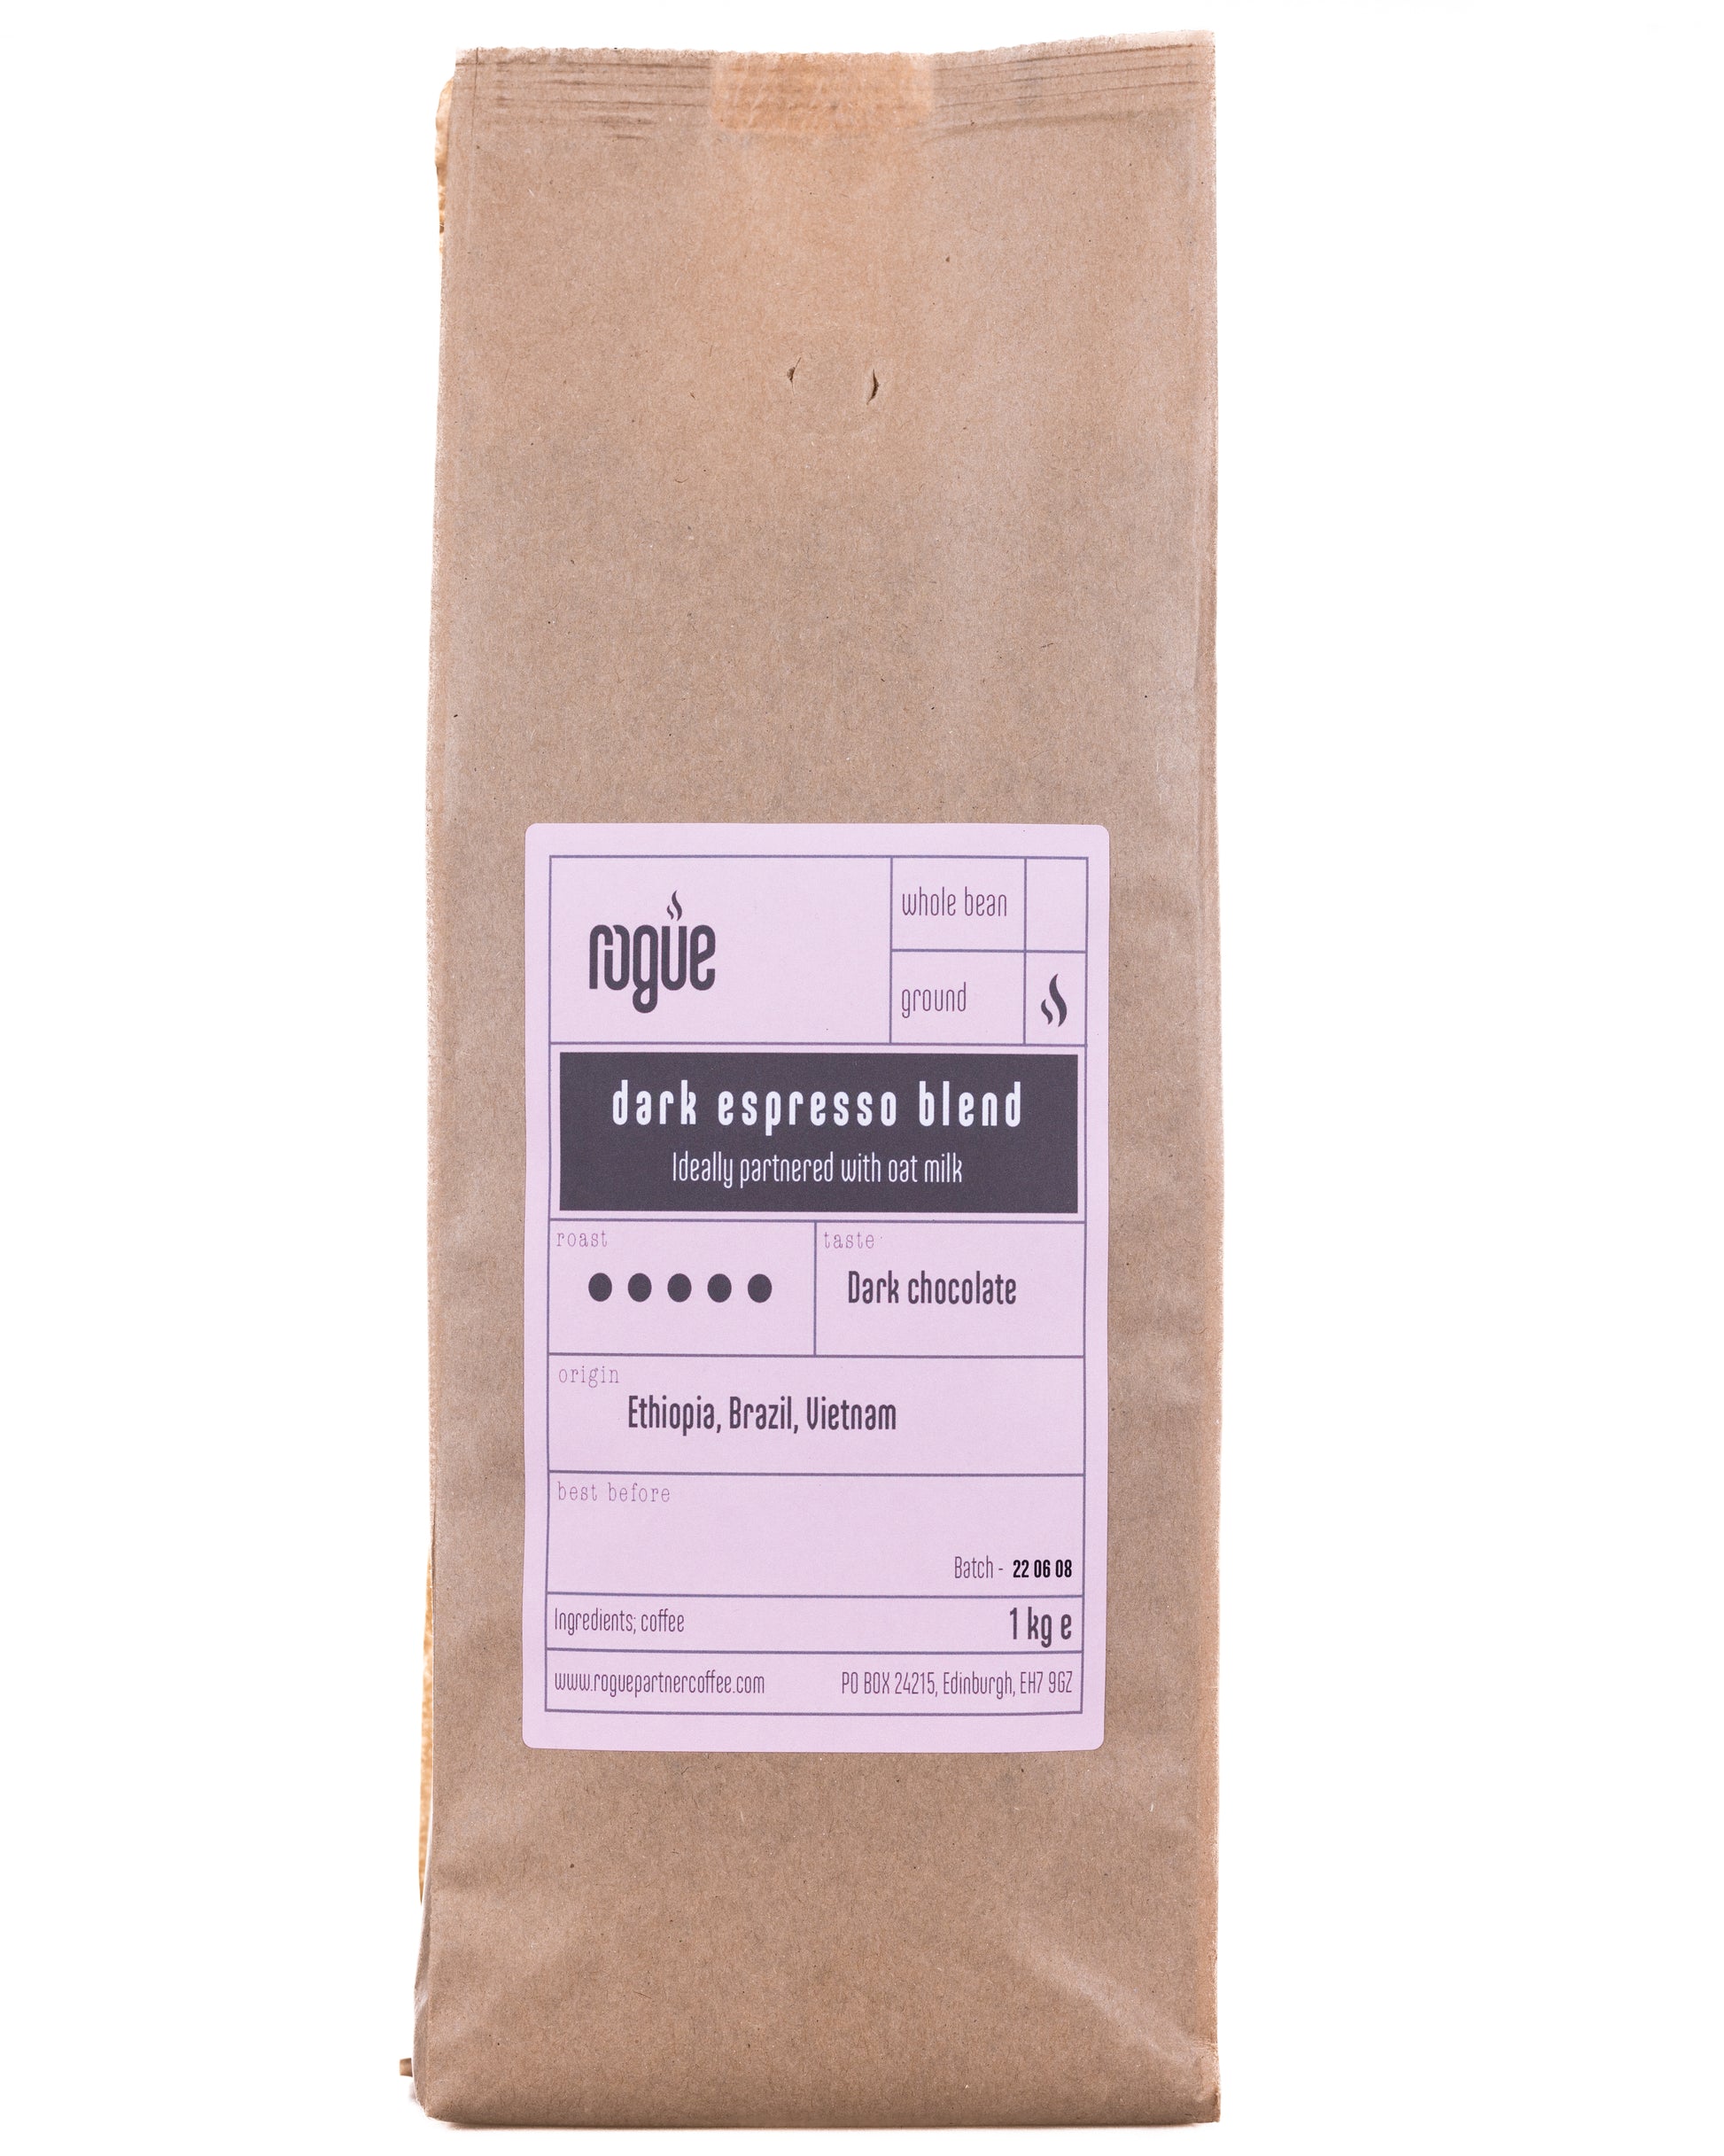 1kg craft bag of dark espresso blend roast ground coffee from Rogue Partner Coffee. Tasting notes are dark chocolate. The origins of the beans are Ethiopia, Brazil and Vietnam